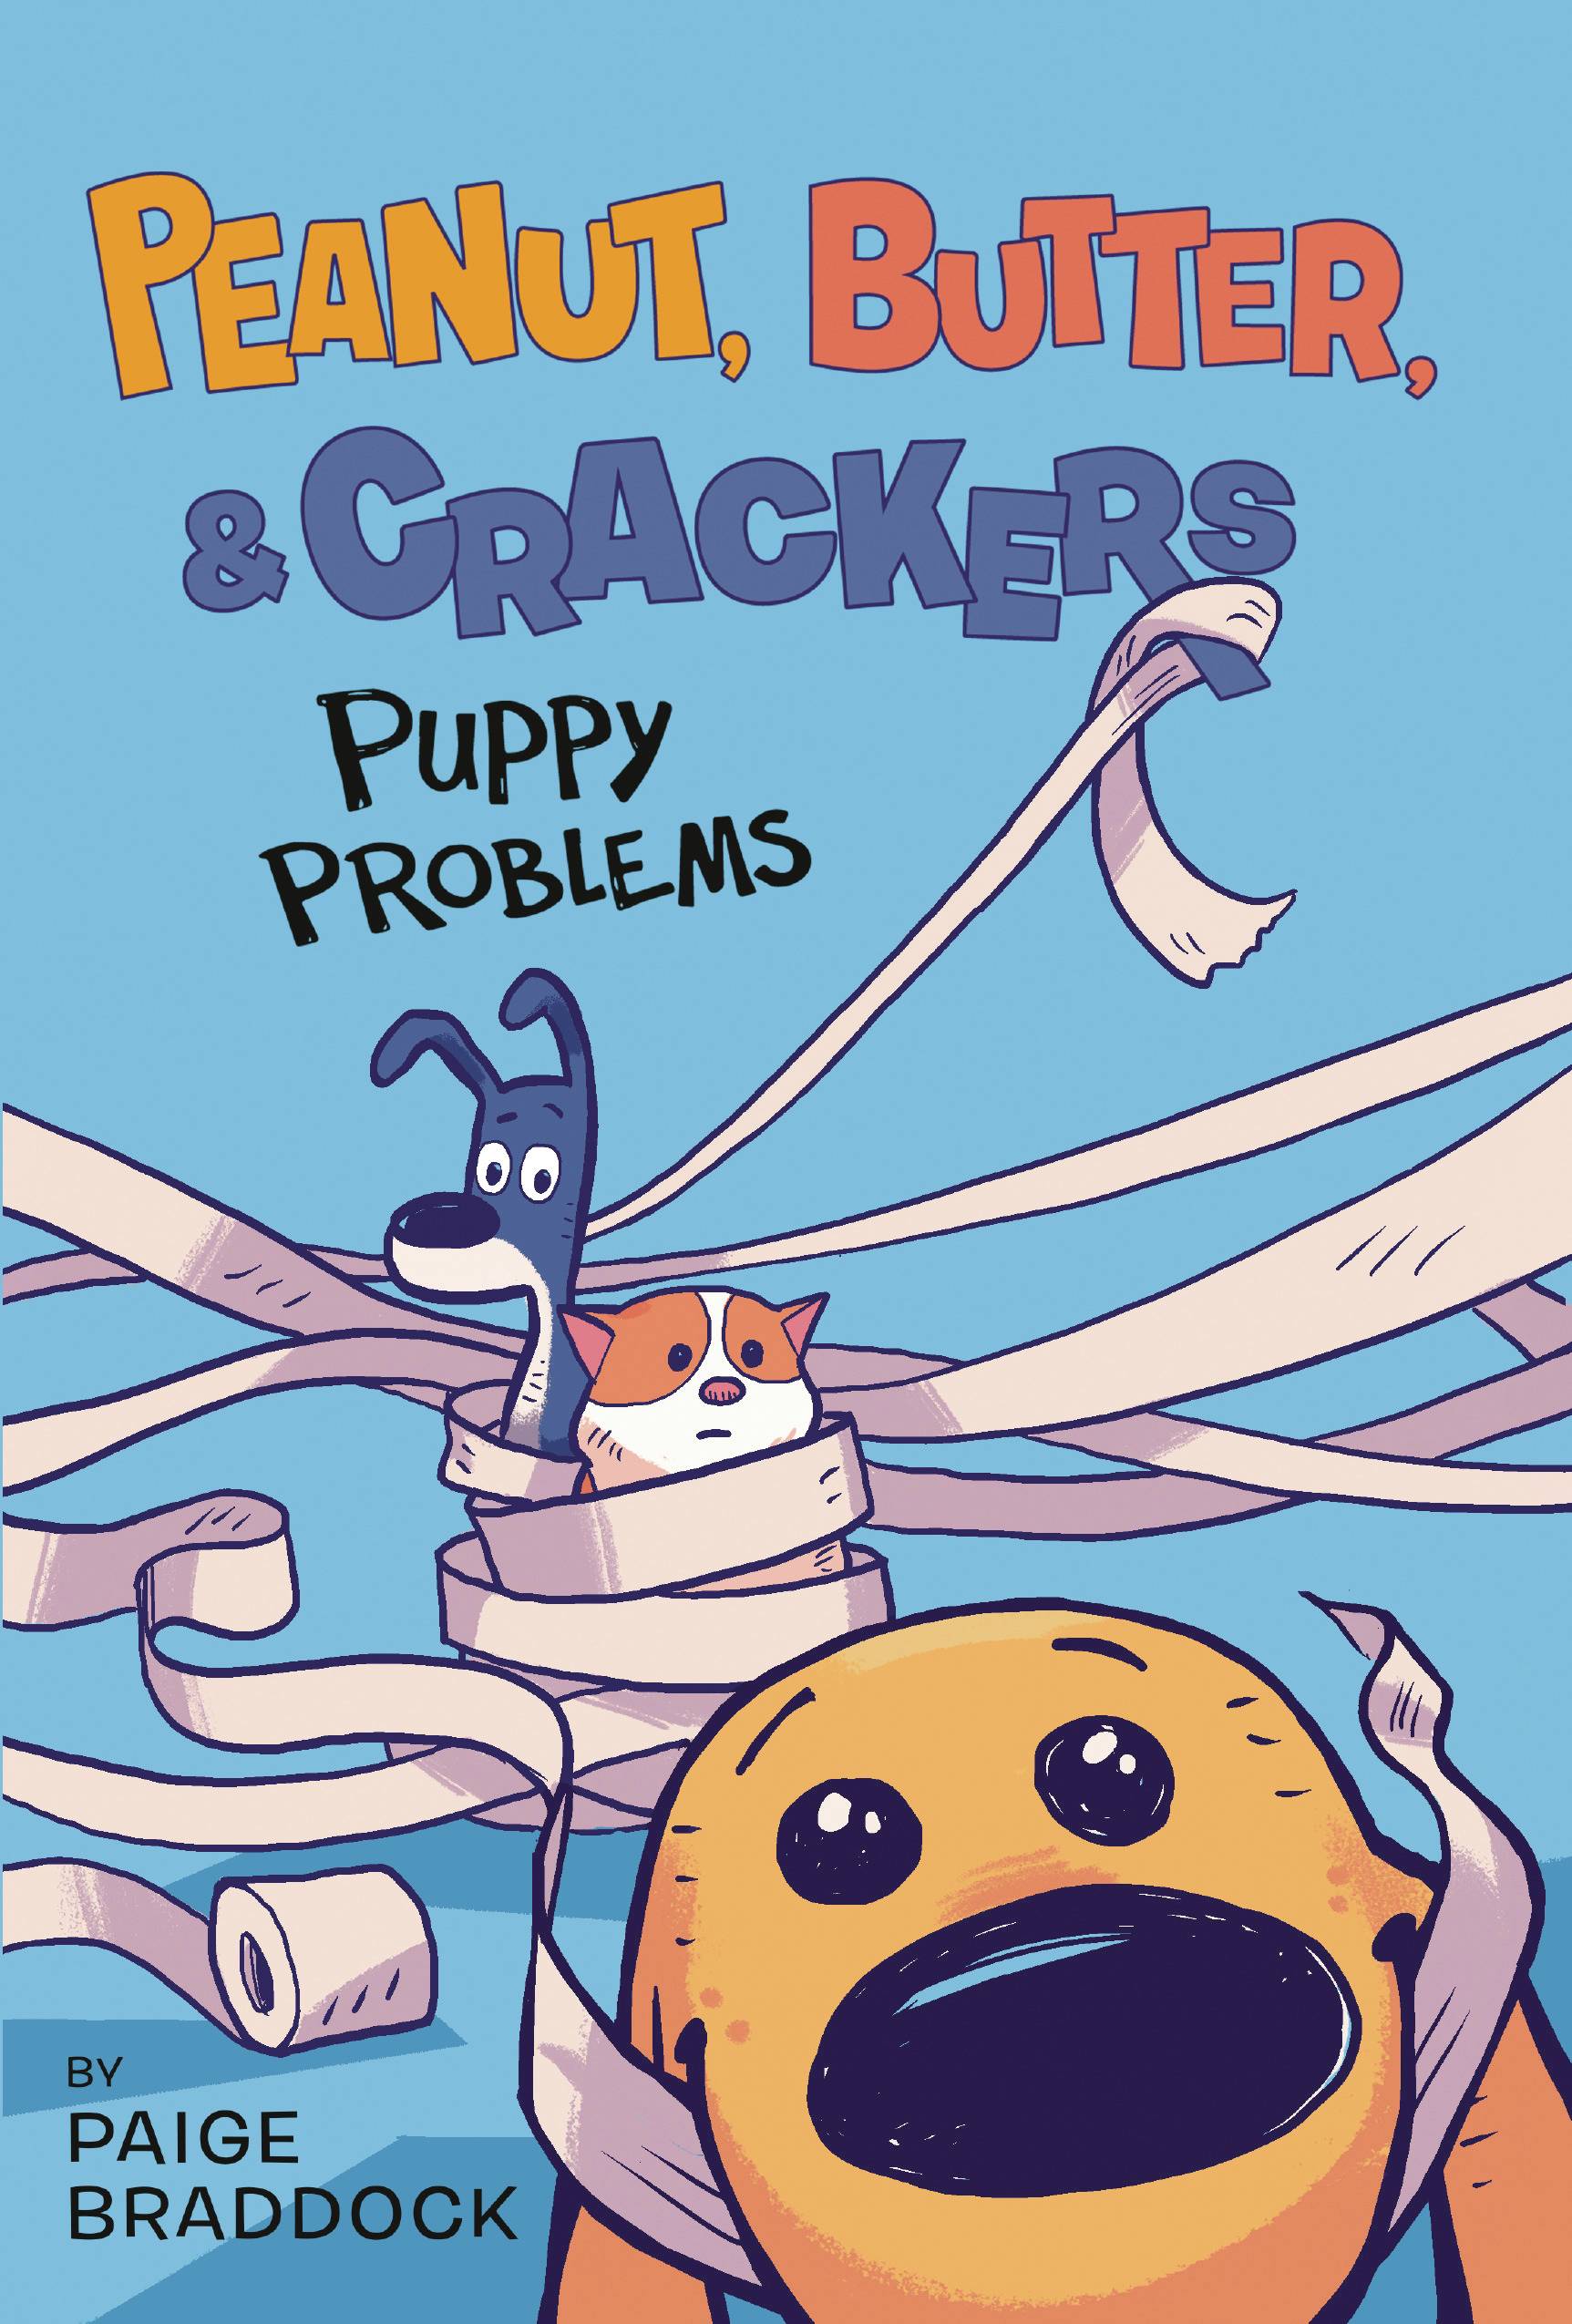 PEANUT BUTTER & CRACKERS YR GN VOL 01 PUPPY PROBLEMS